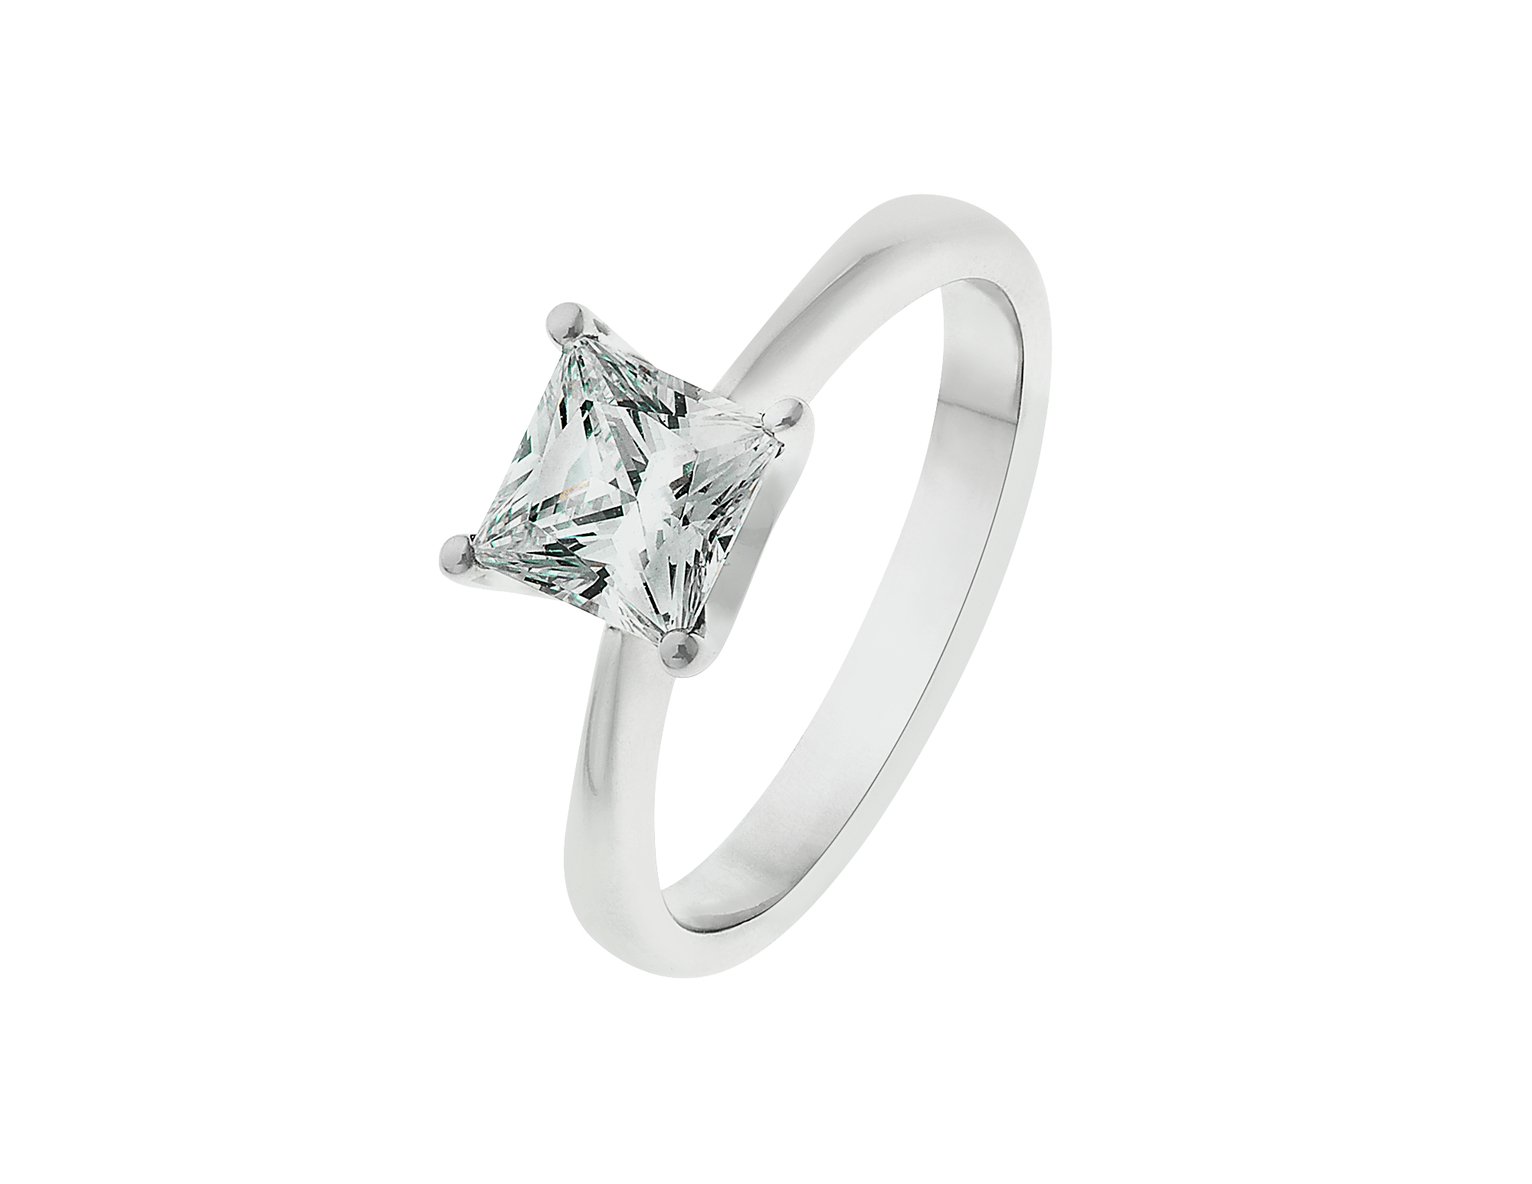 Revere Sterling Silver Princess Cut Cubic Zirconia Ring